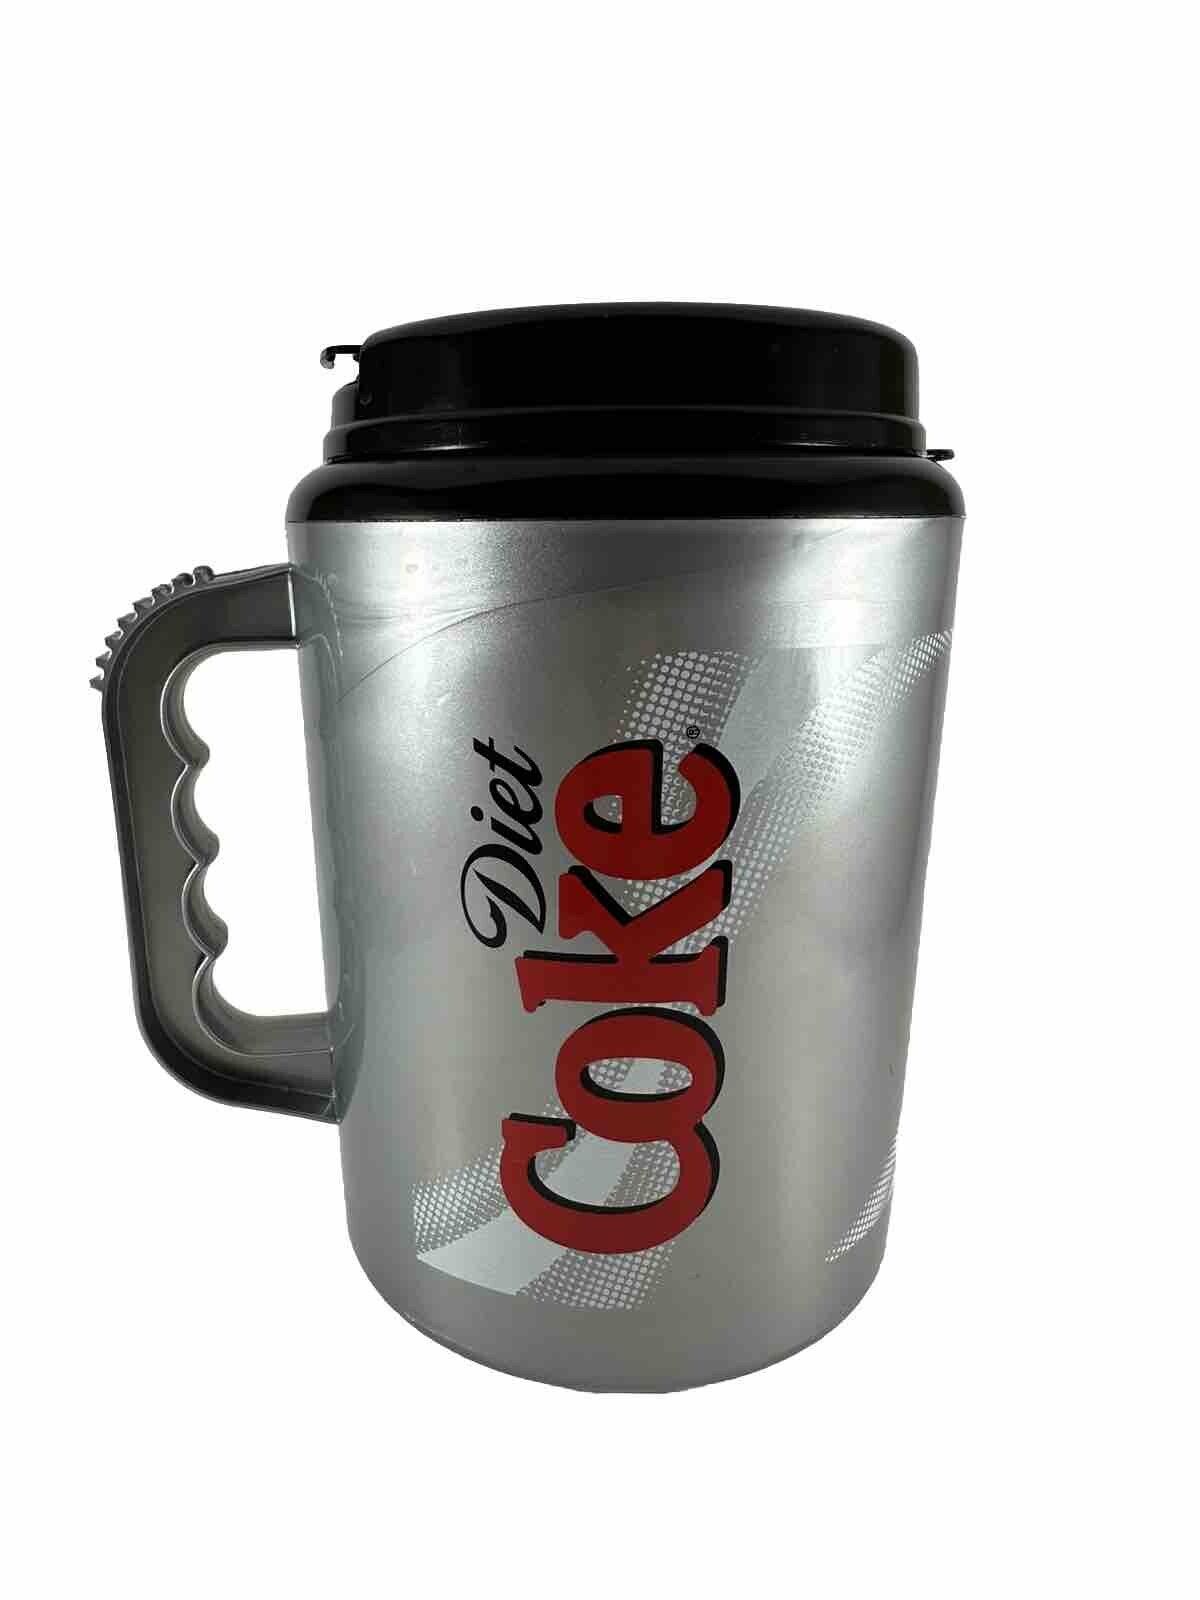 Rare Betras USA Large Diet Coke 64 oz. Plastic Insulated Cold Drink Cup Mug